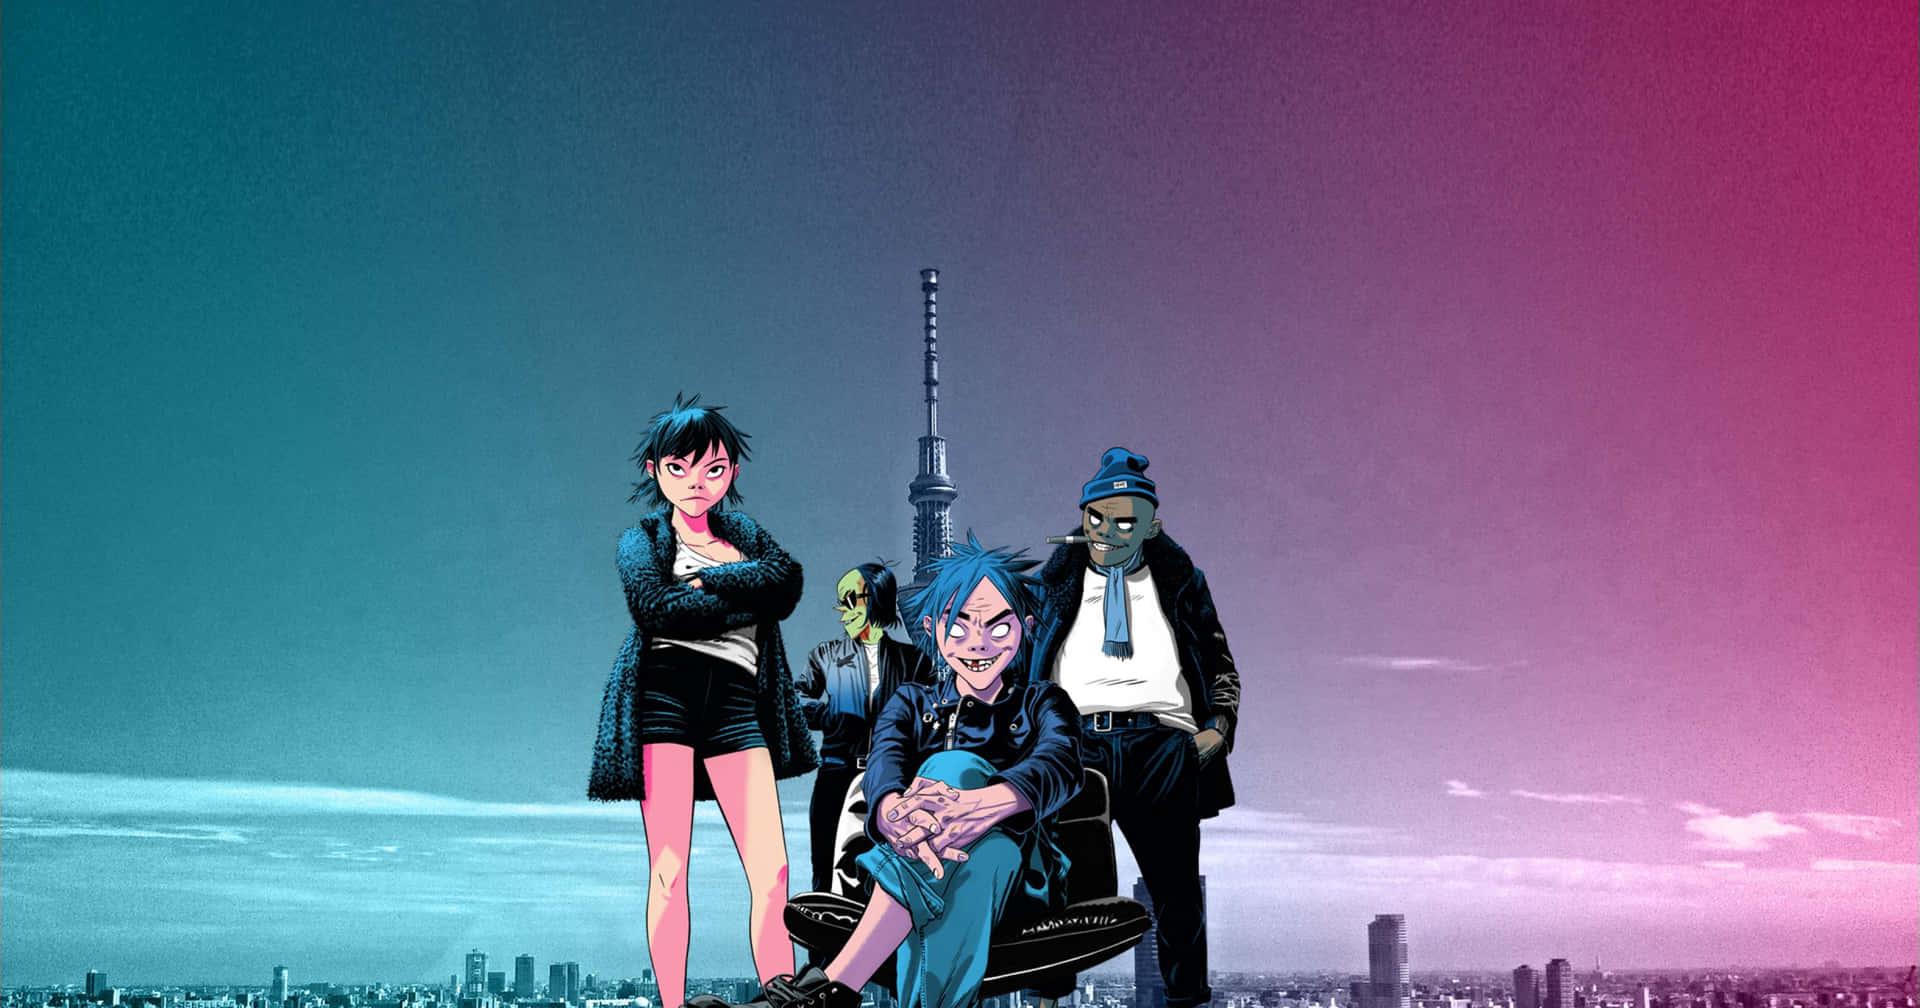 Fans of Gorillaz can enjoy a high-resolution 4K look at the band Wallpaper